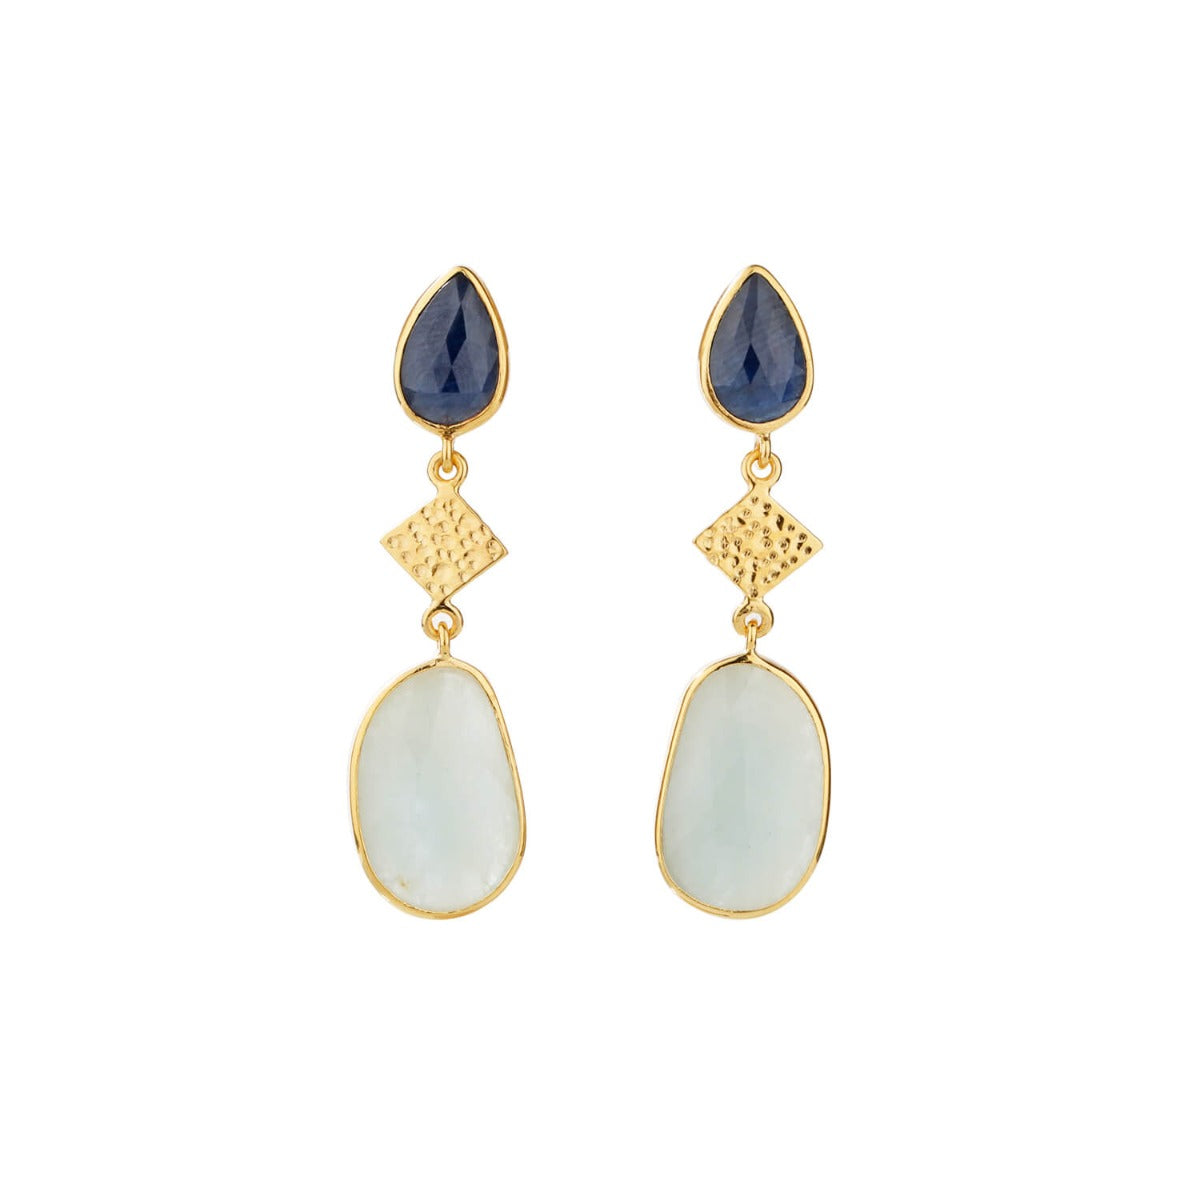 Gold plated yellow and blue sapphire teardrop earrings